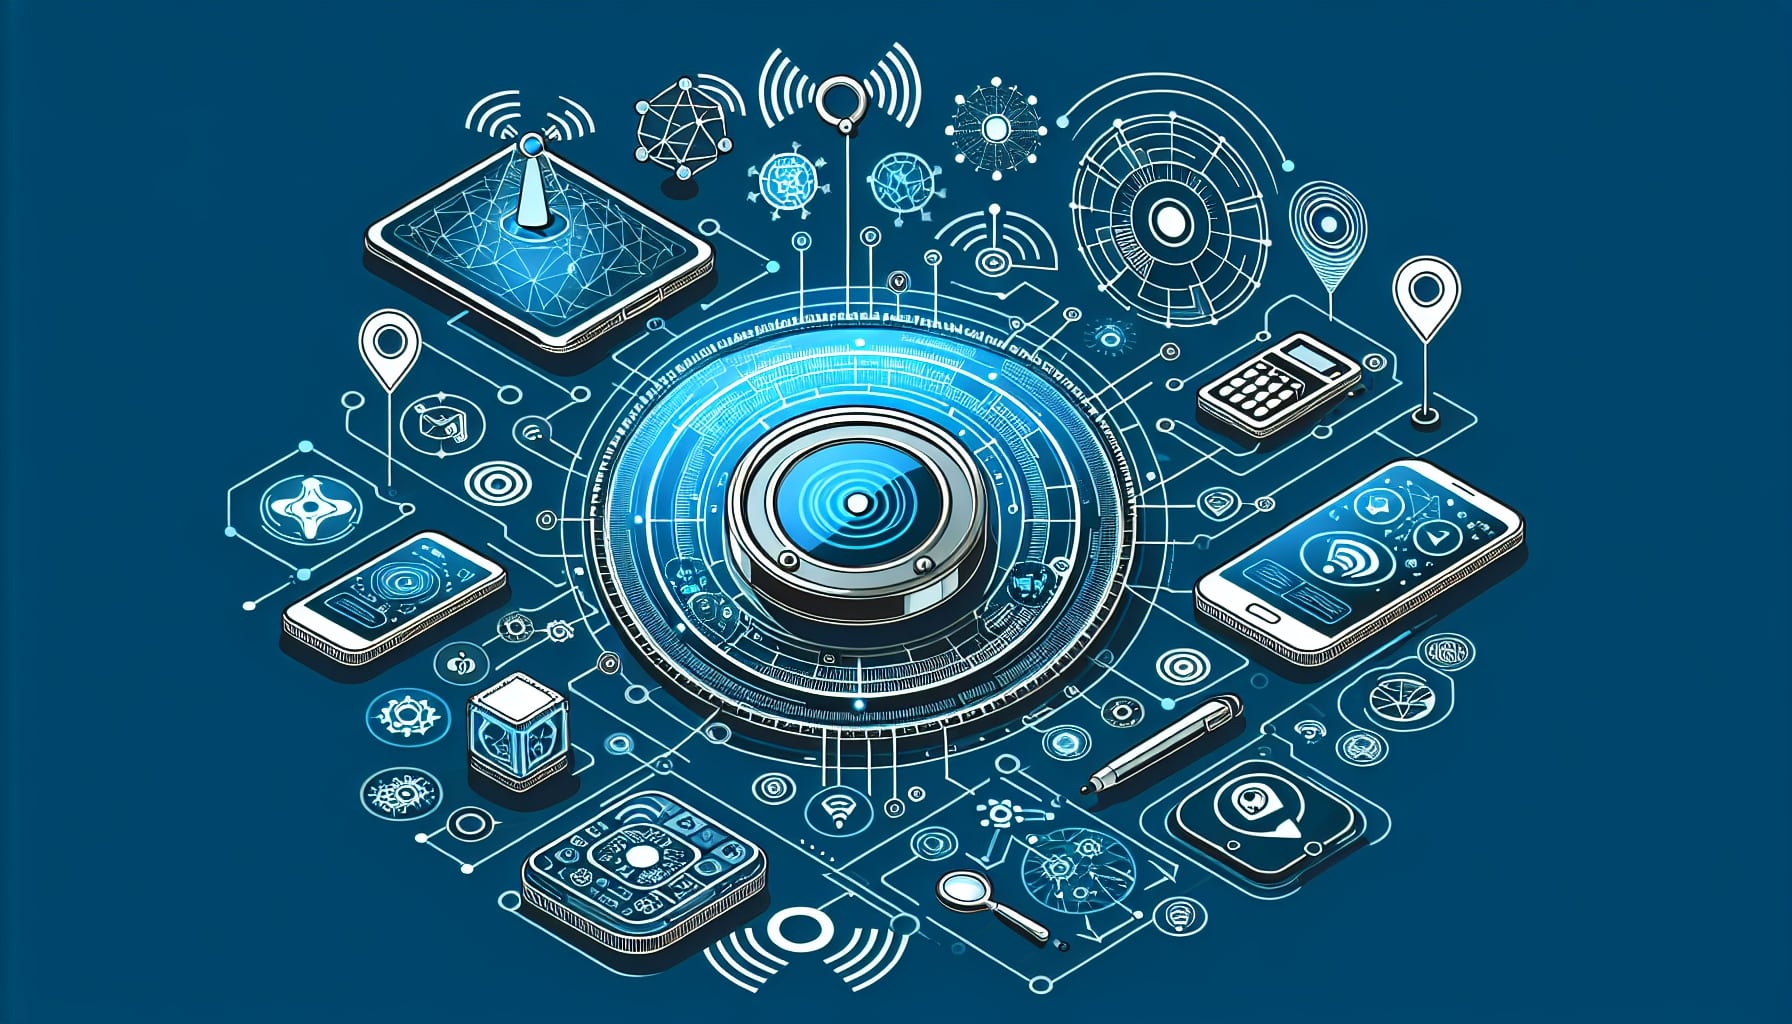 Isometric technology and connectivity illustration on blue background.